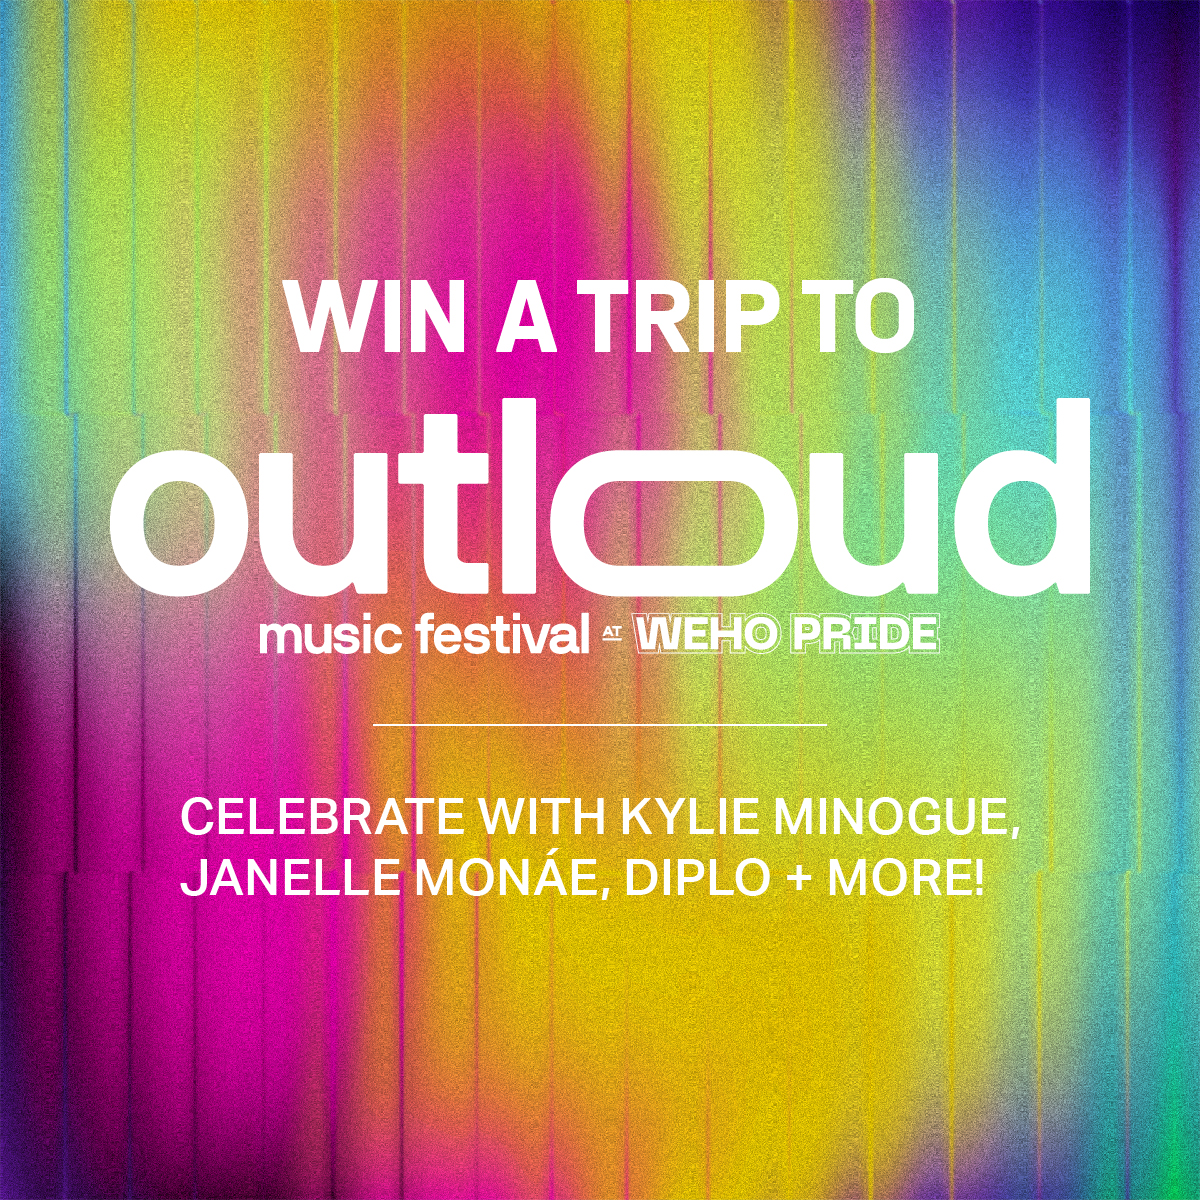 🌈ENTER TO WIN: the ultimate #Pride experience! Flyaway to @WeAre_OUTLOUD feat. @kylieminogue, @JanelleMonae, @diplo & more from 6/1-2. Prize: 2 VIP tix, $600 travel, & hotel stay courtesy of @westhollywood. 

t.dostuffmedia.com/t/c/s/143979